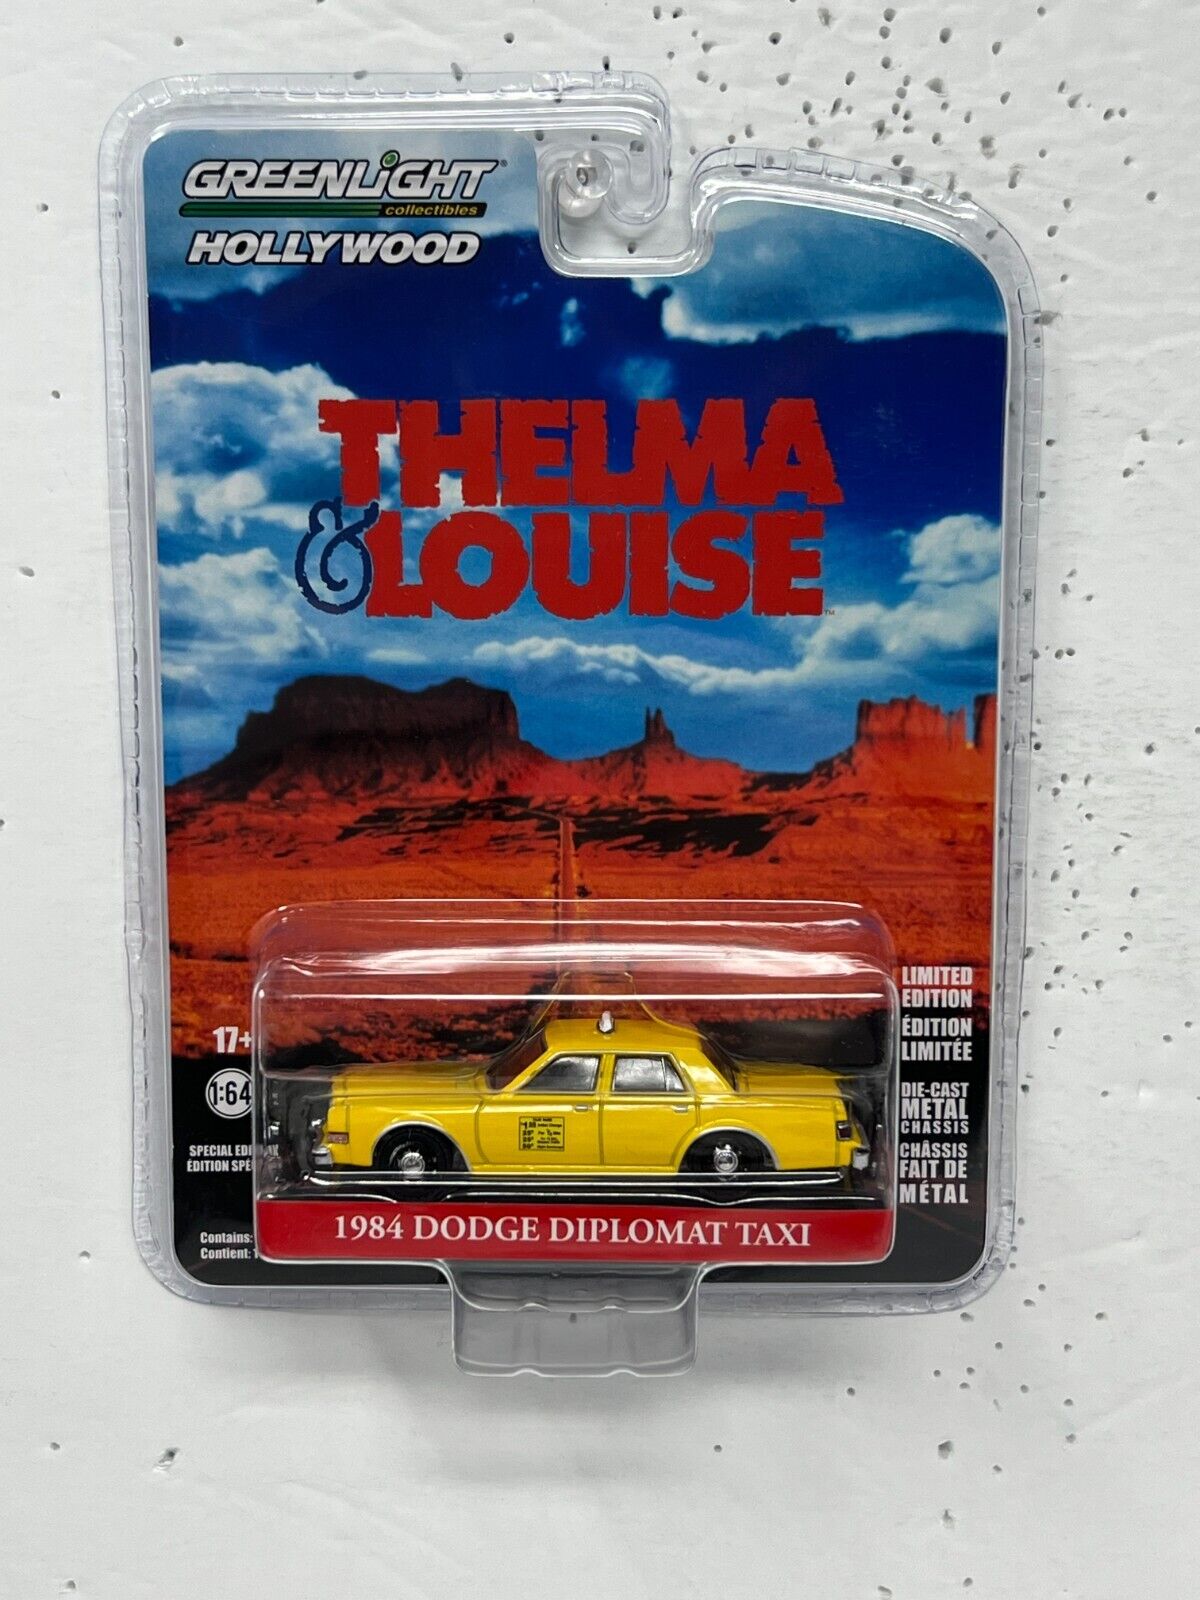 Greenlight Hollywood Thelma & Louise 1984 Dodge Diplomat 1:64 Diecast